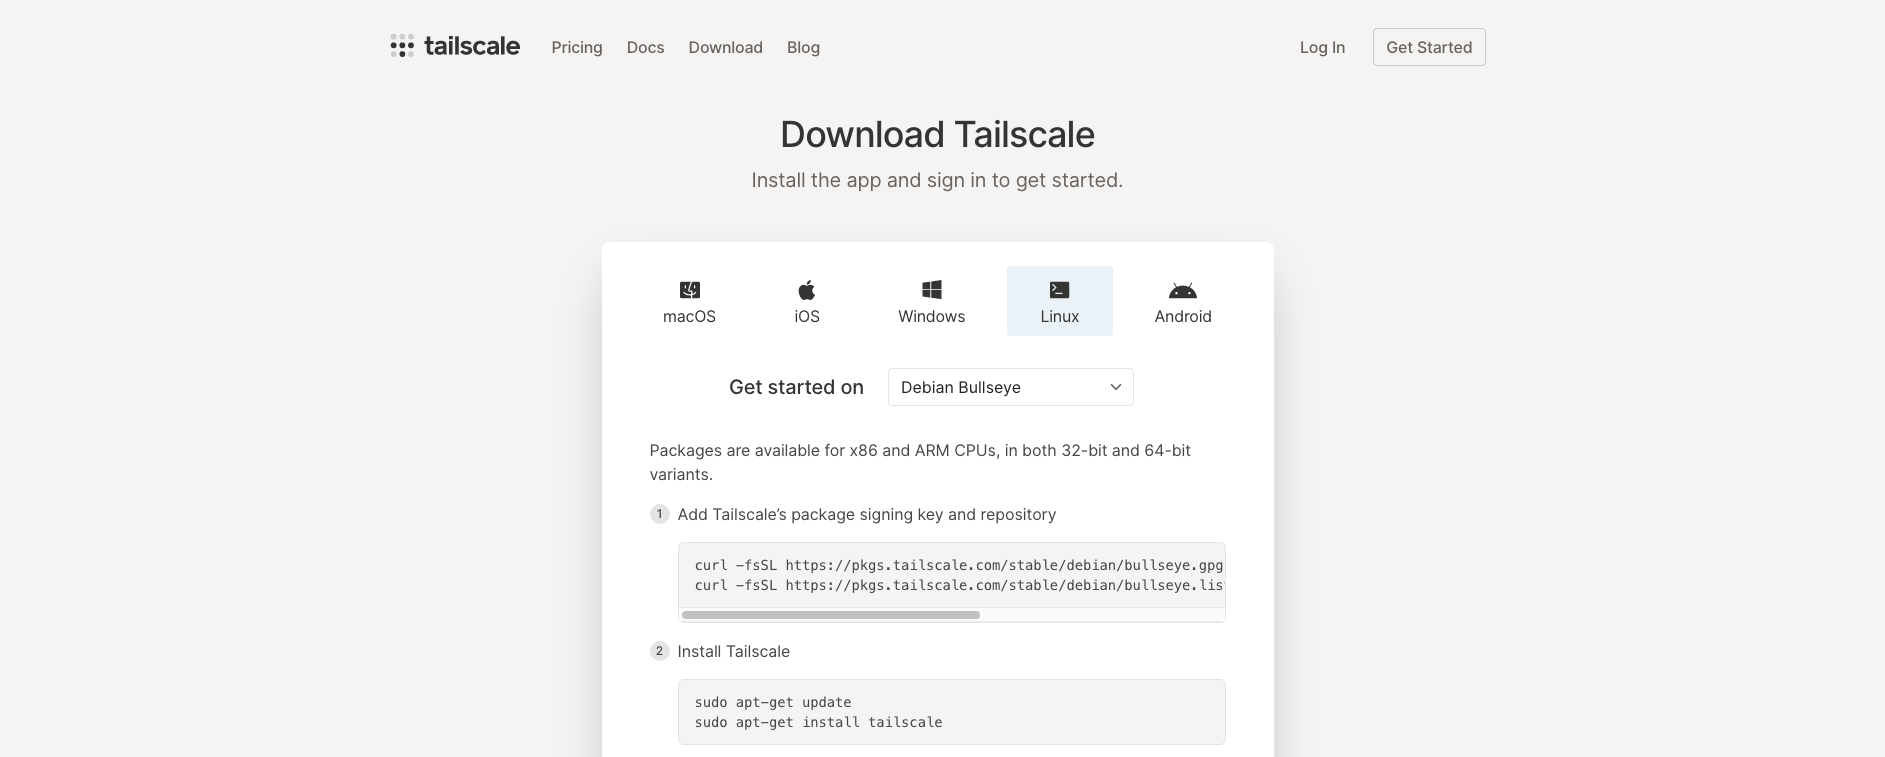 Implementing Tailscale at HostiFi